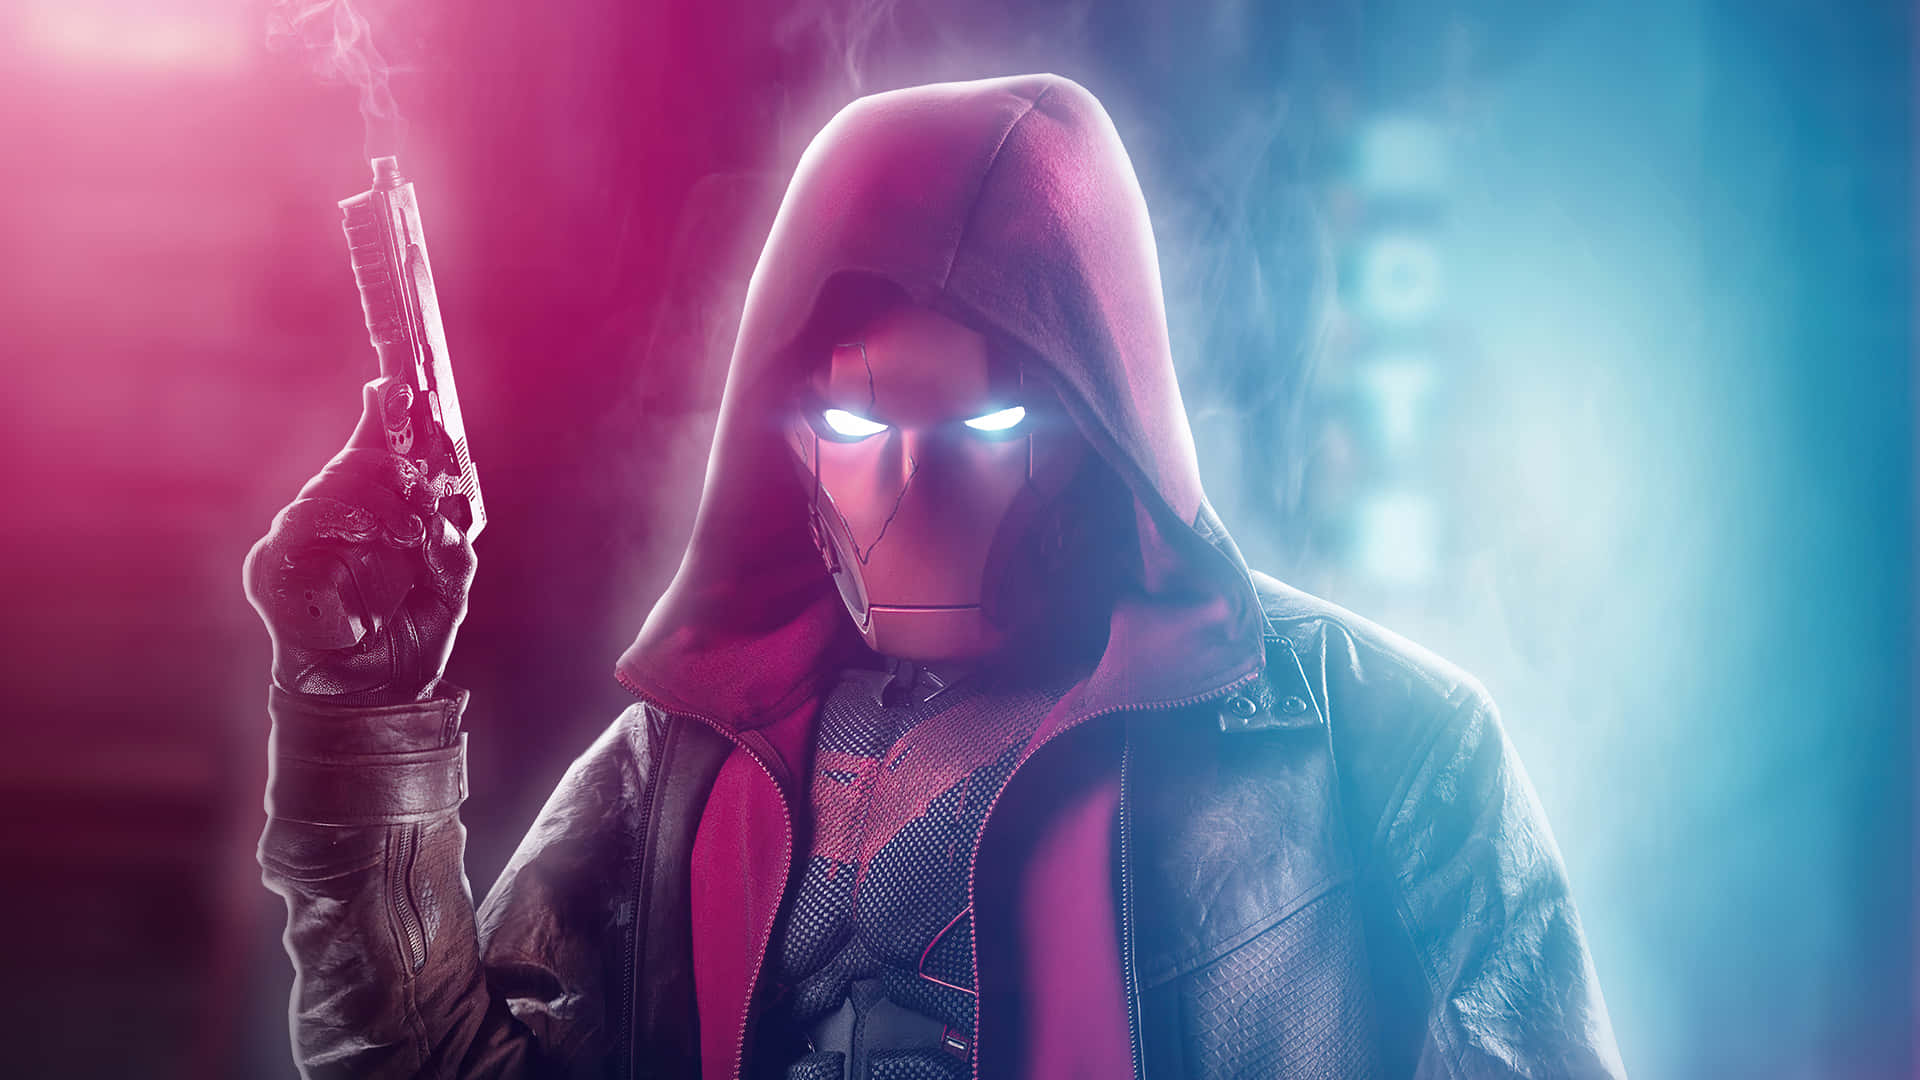 Red Hood dispatches justice with her passion for justice